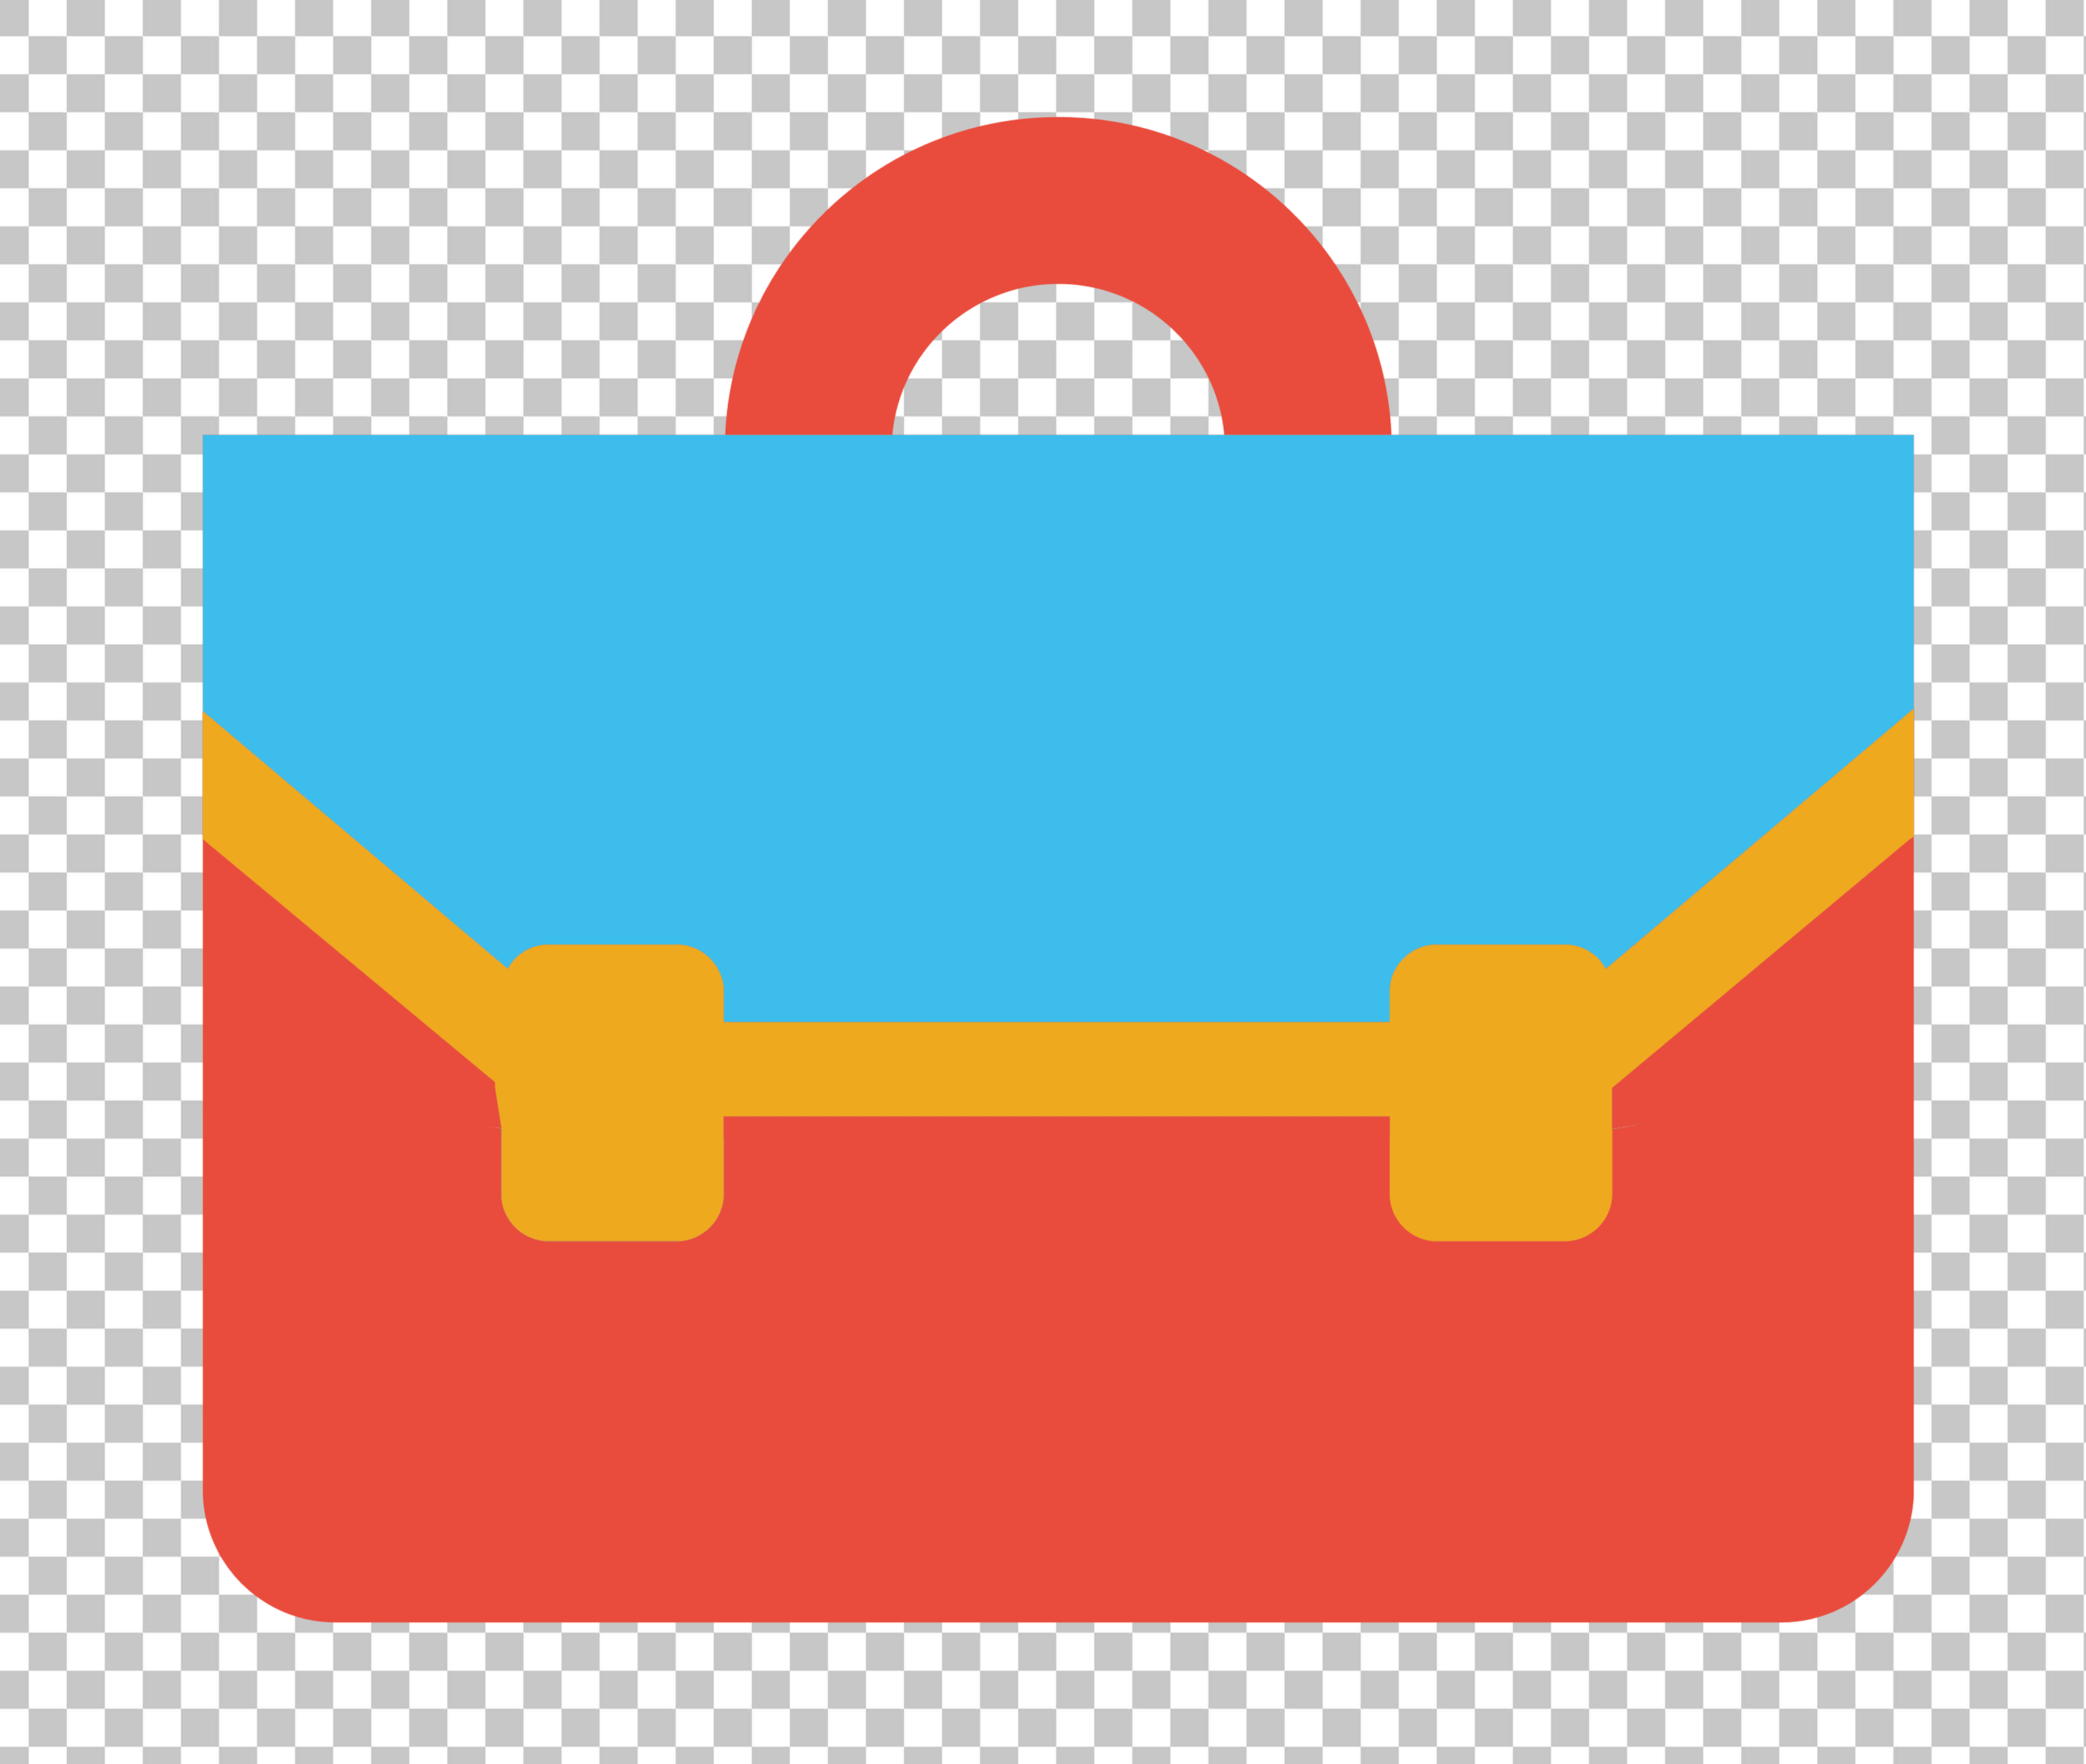 Cartoon Style Briefcase PNG Image